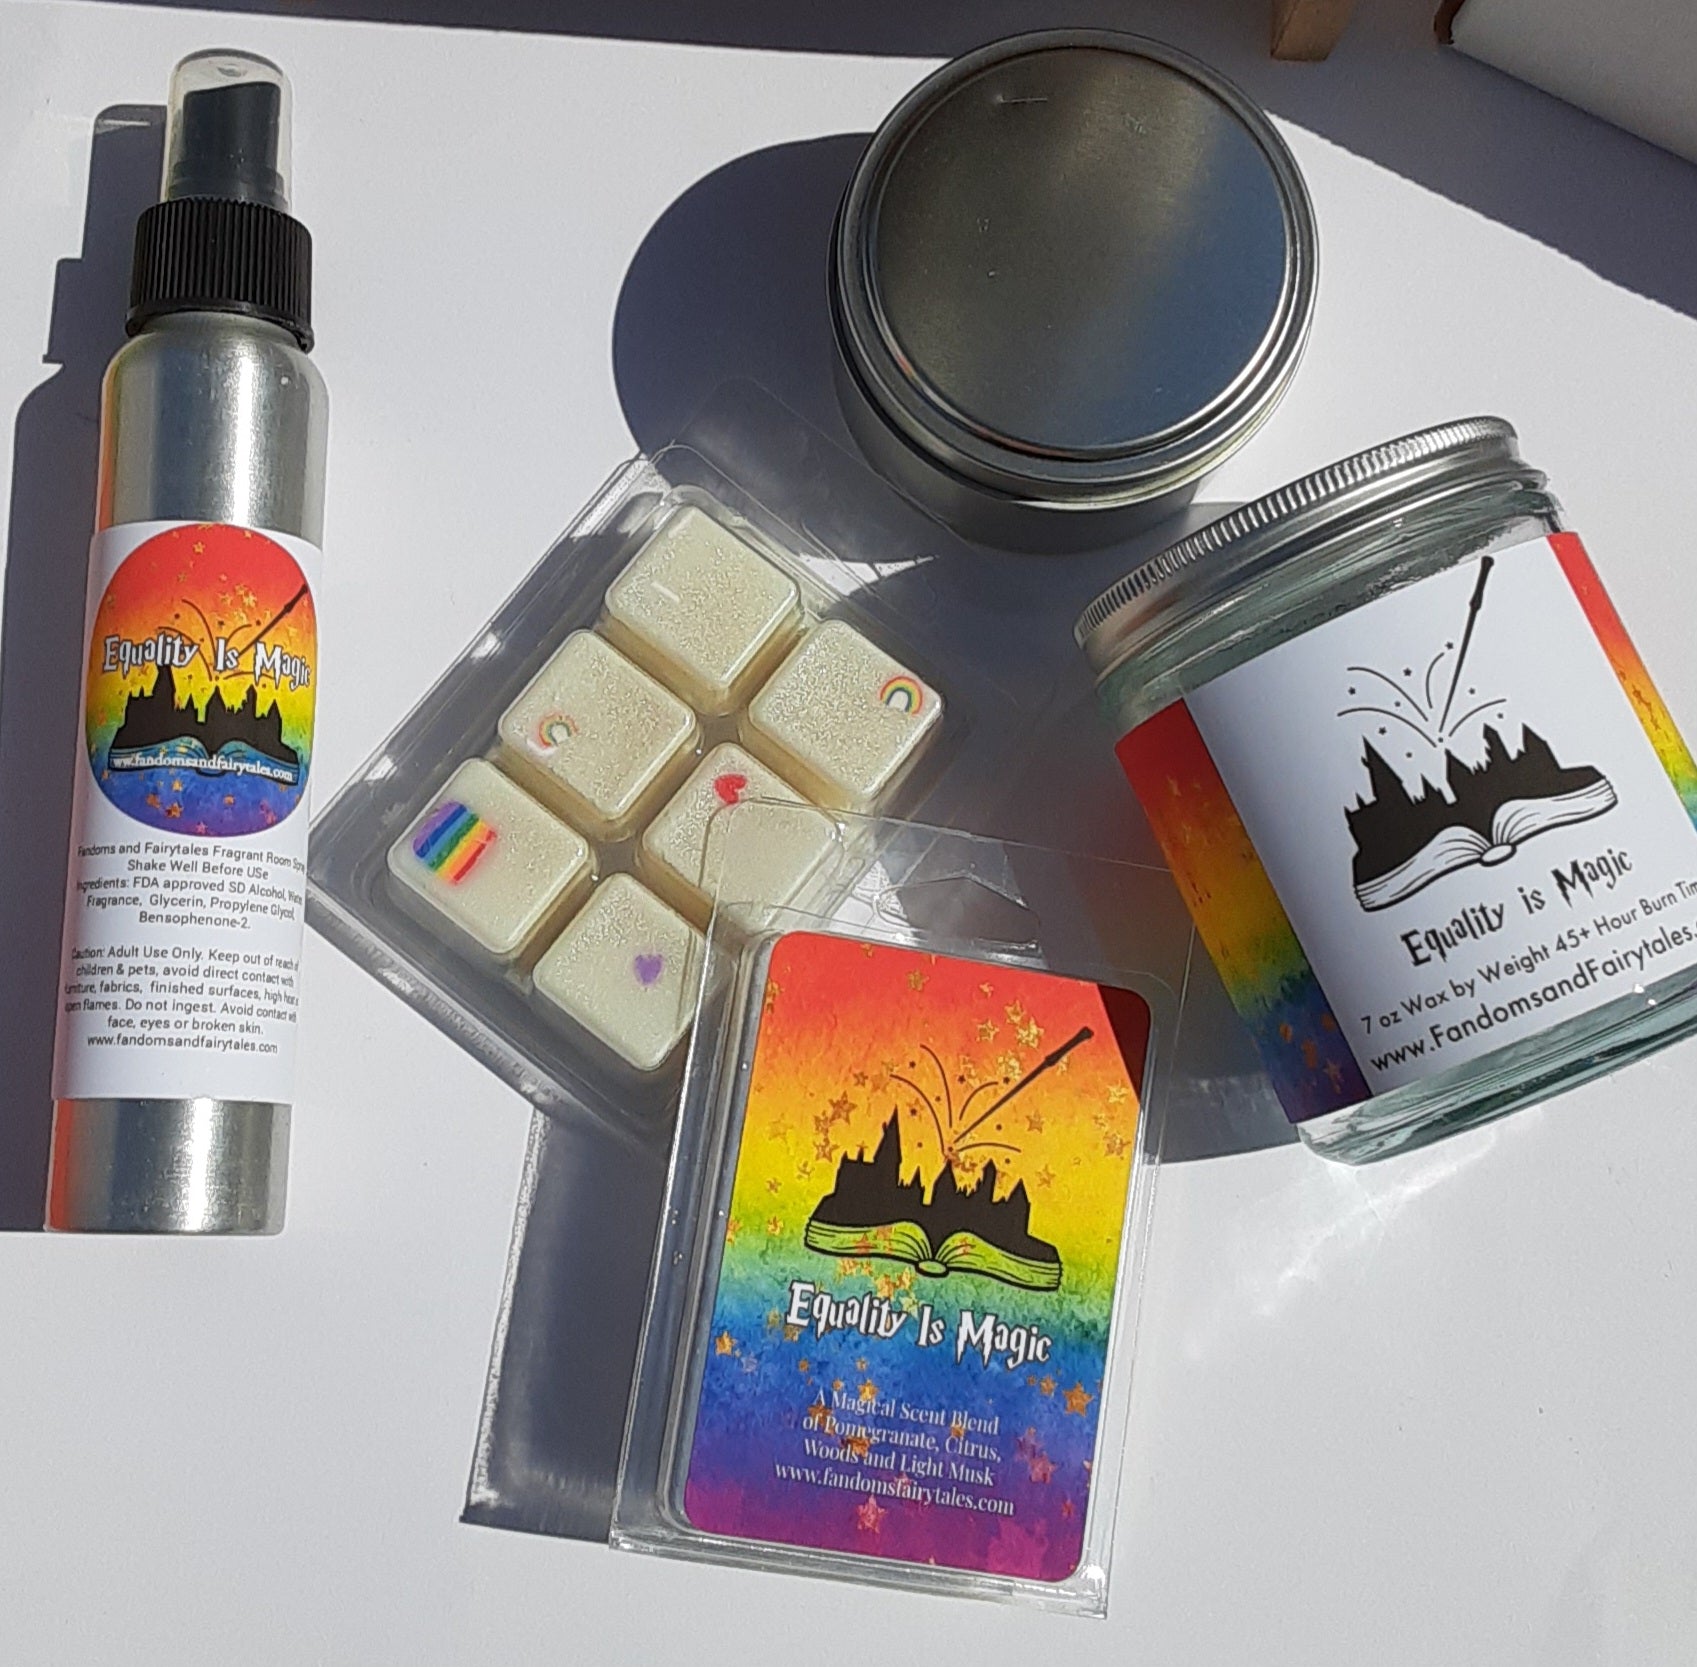 Equality is Magic, wax melts, room Spray and candles